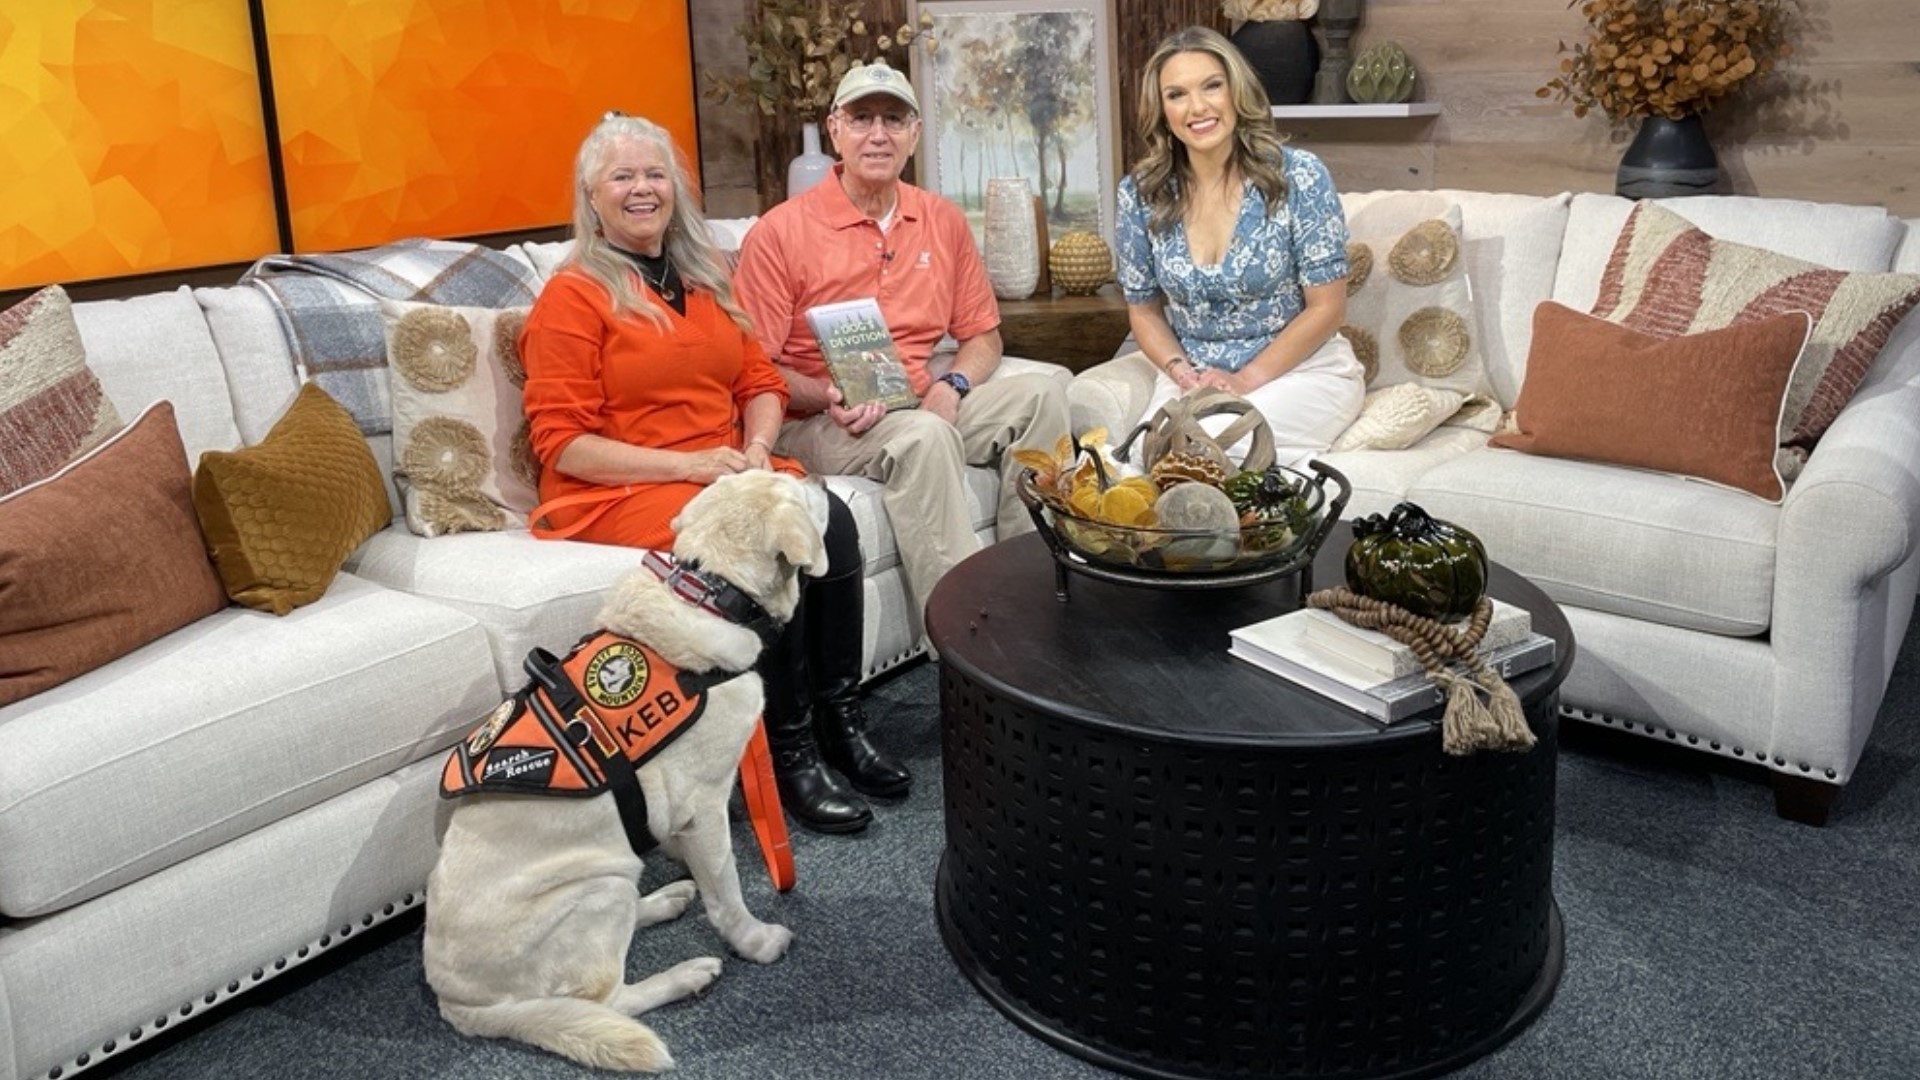 Search and rescue dog Keb, her handler Suzanne Elshult, and their search partner Guy Mansfield discuss their new book, "A Dog's Devotion." #newdaynw